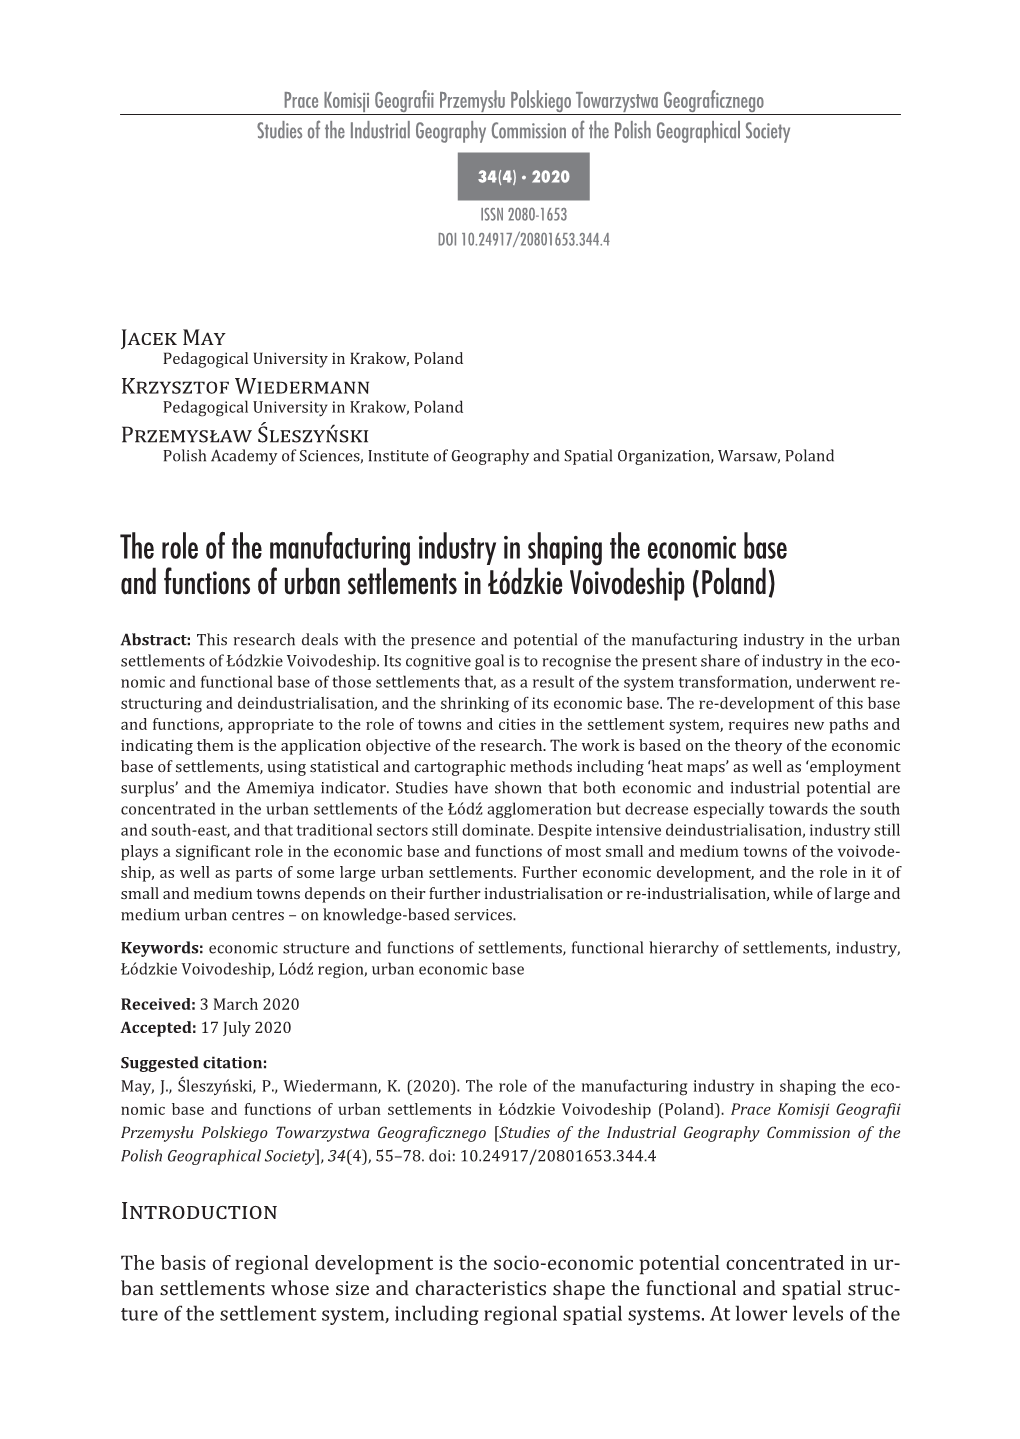 The Role of the Manufacturing Industry in Shaping the Economic Base and Functions of Urban Settlements in Łódzkie Voivodeship (Poland)